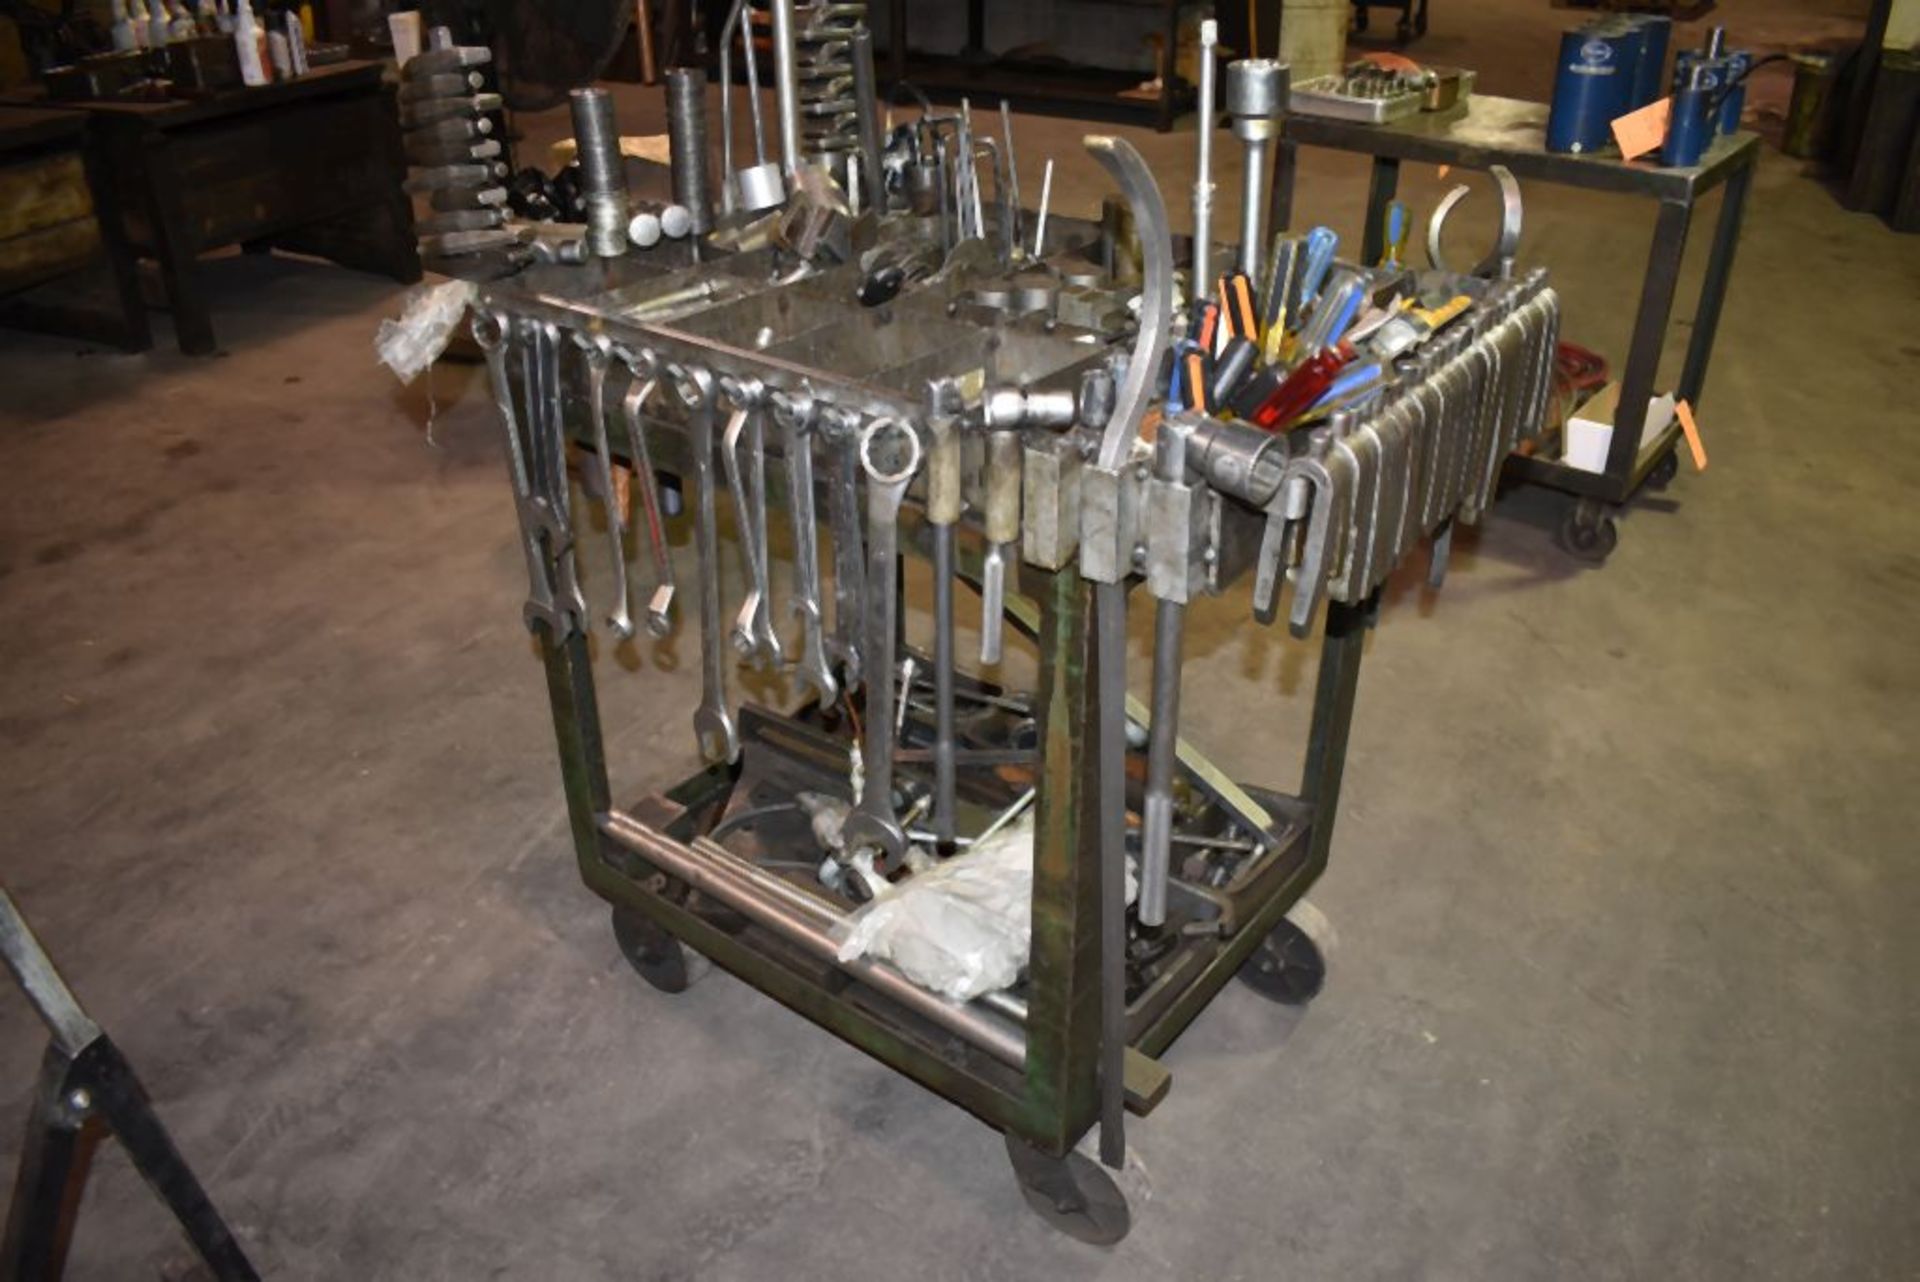 HEAVY DUTY TOOL CART WITH CONTENTS, LARGE ASSORTMENT OF TOOLS, 39"H x 24"W x 38"L - Image 2 of 2